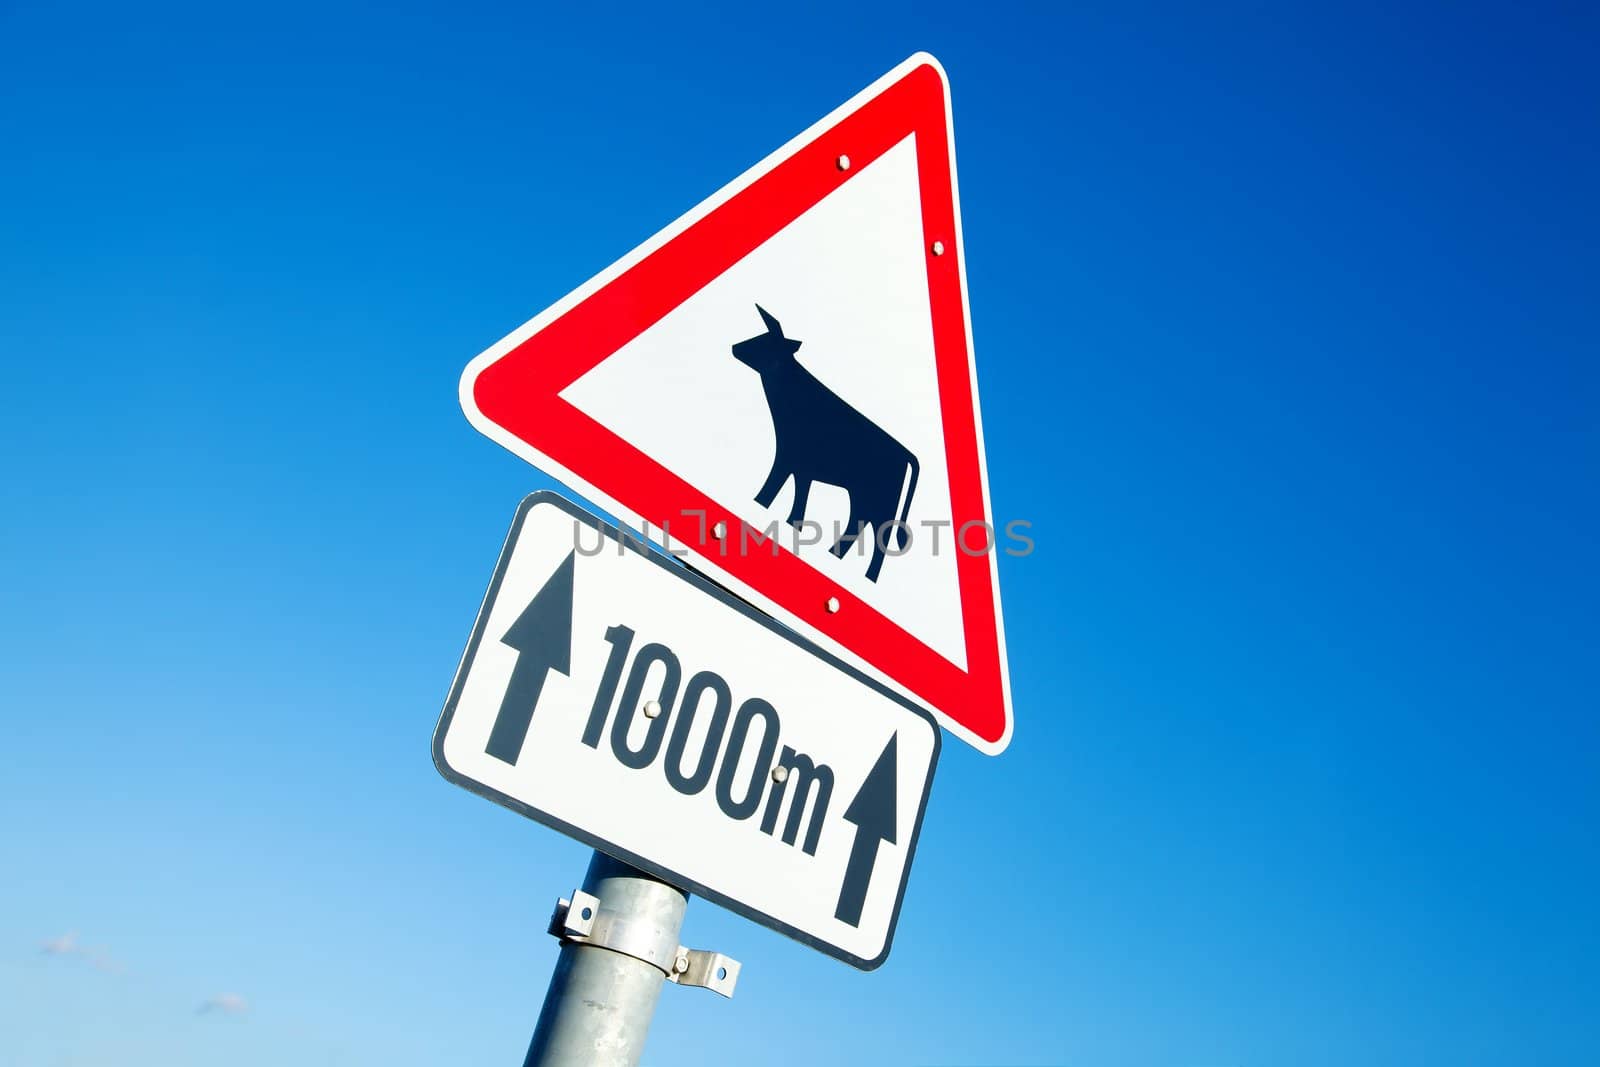 Warning traffic sign show cows